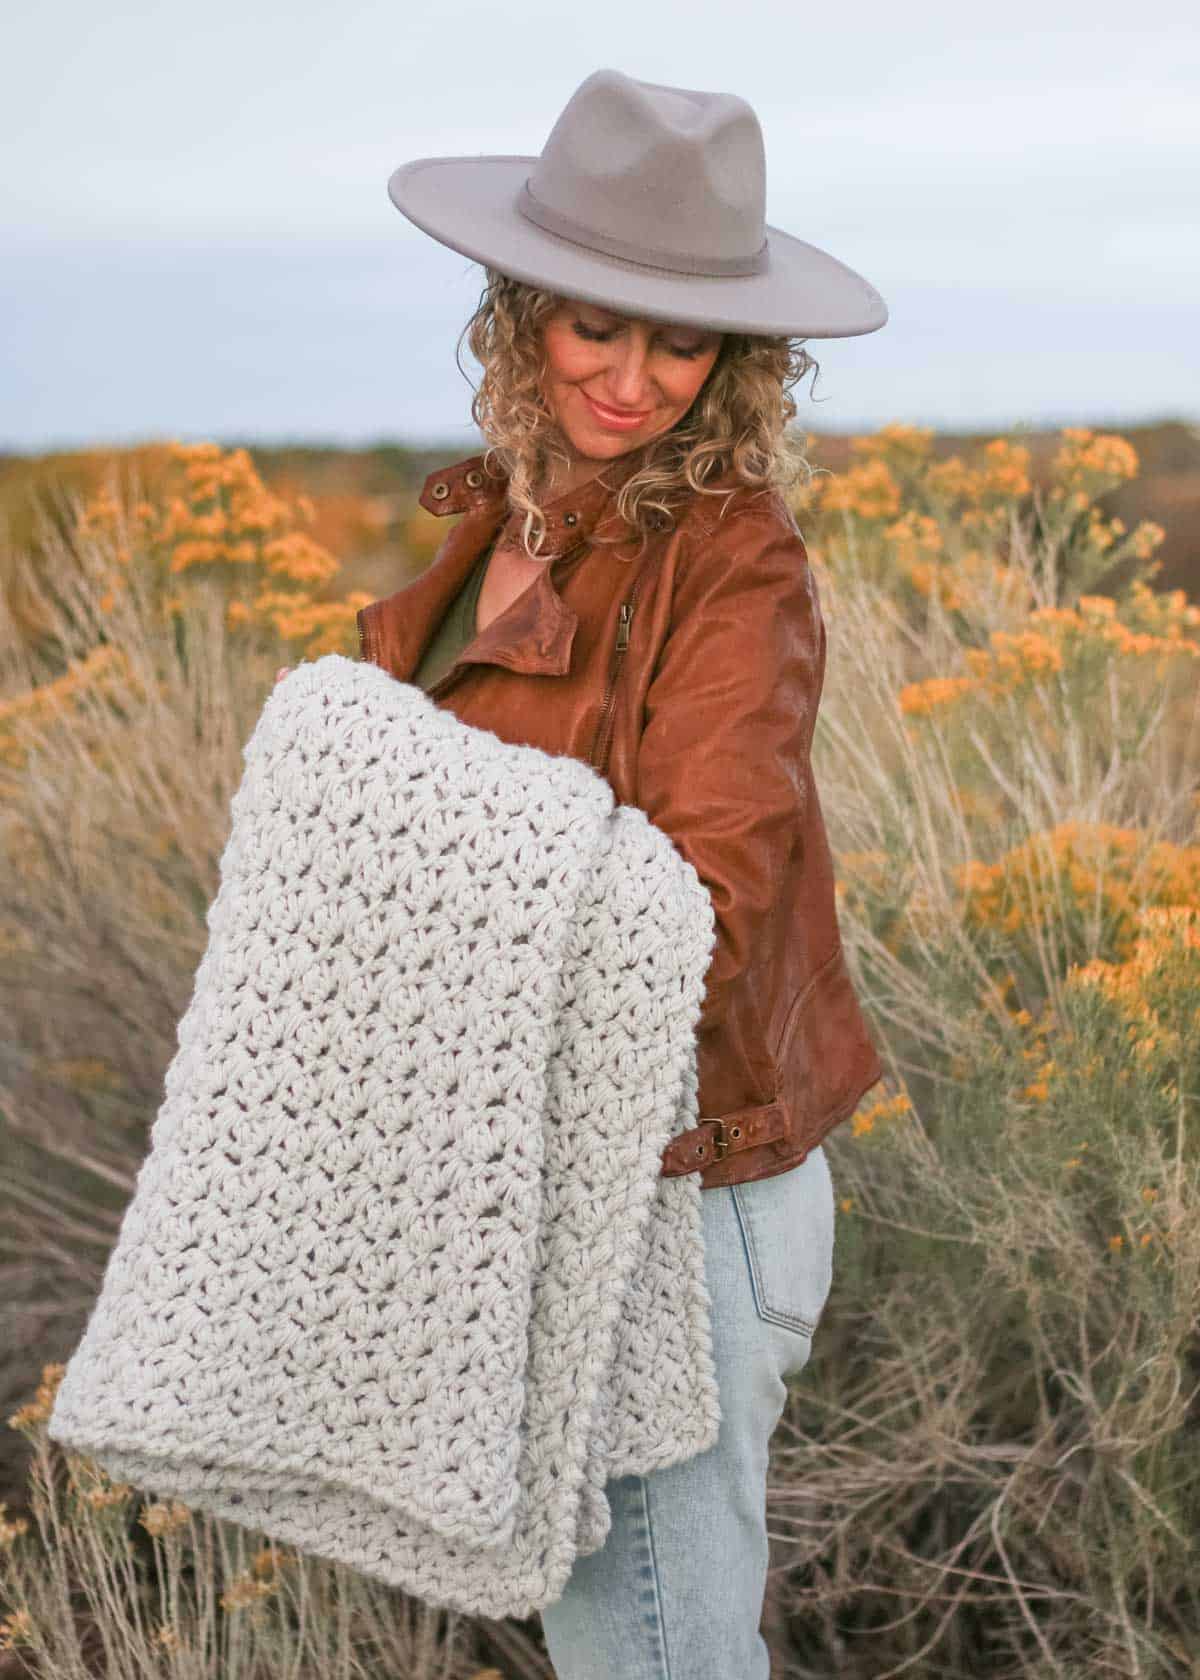 A woman looking down, standing on a field, wearing a fedora hat, a leather jacket, and holding a chunky crochet blanket.